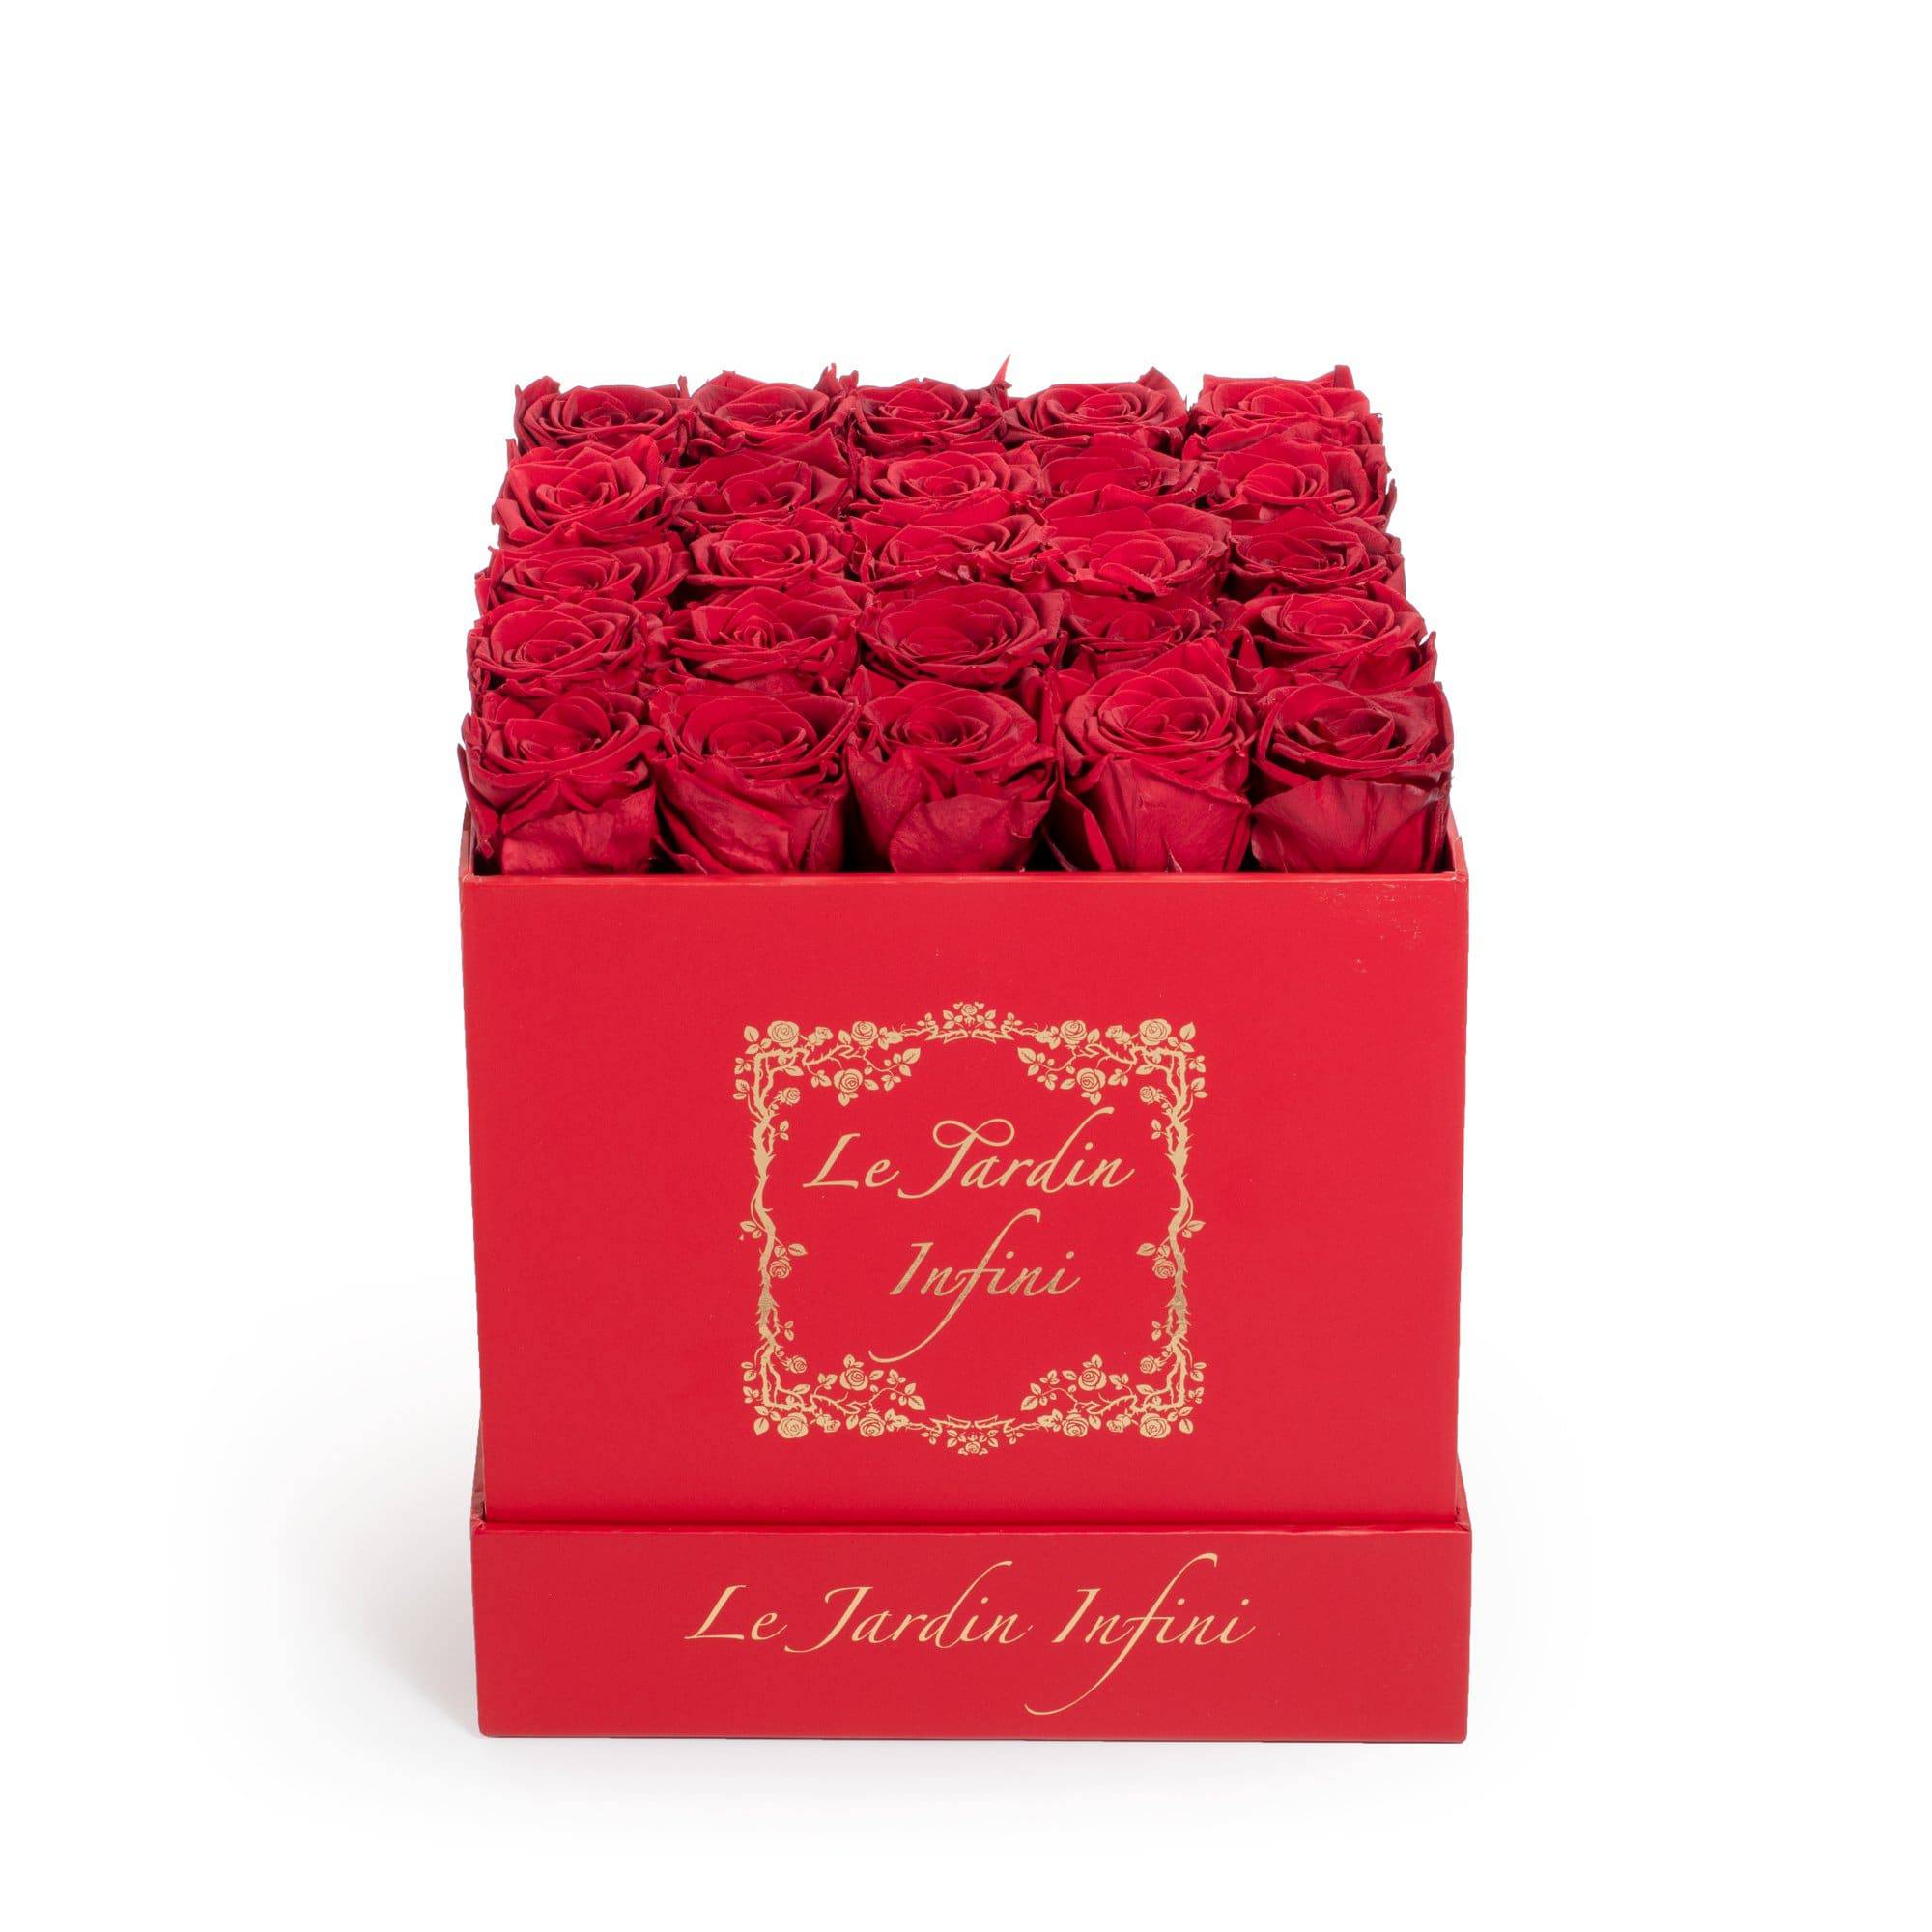 Red Preserved Roses - Medium Square Red Box